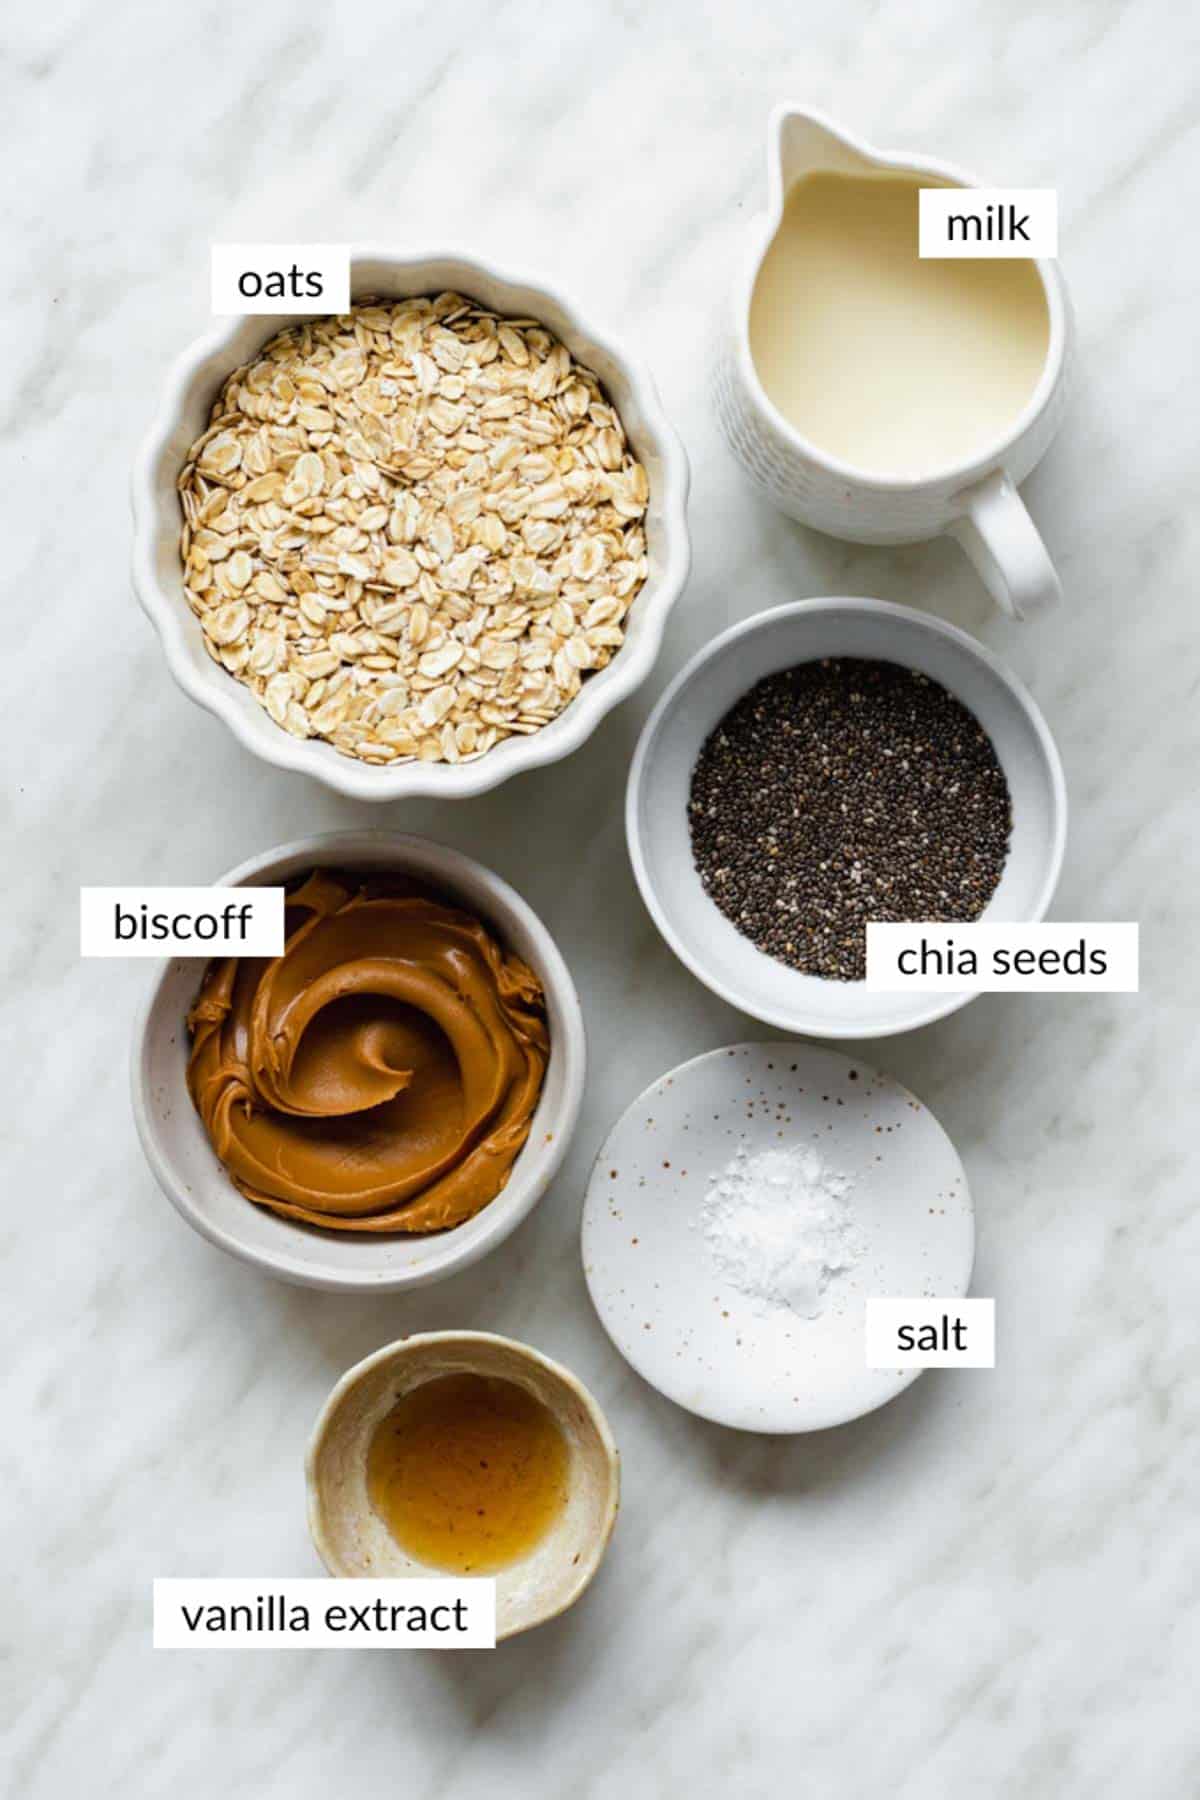 Gathered ingredients for making biscoff overnight oats with text overlay on each ingredient.